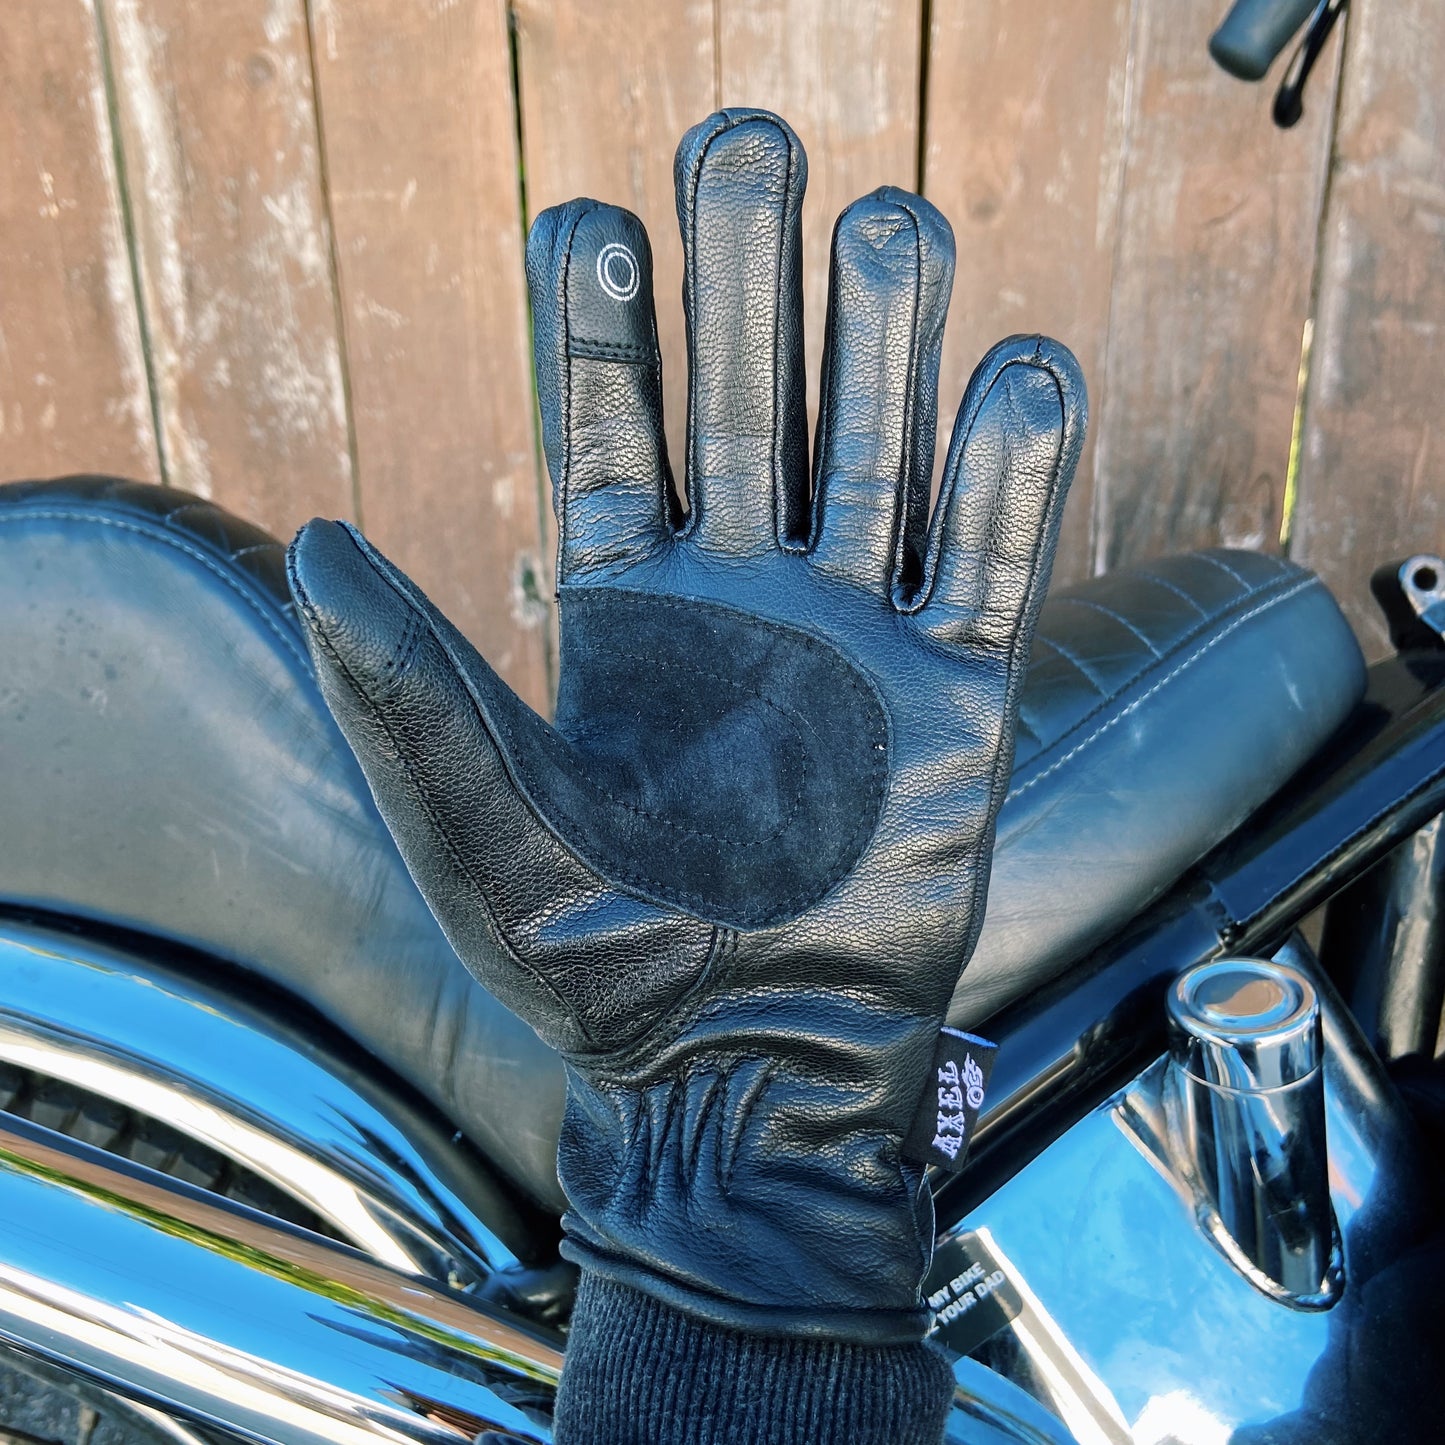 LEATHER, WATERPROOF LINED GLOVES - FALL STYLE